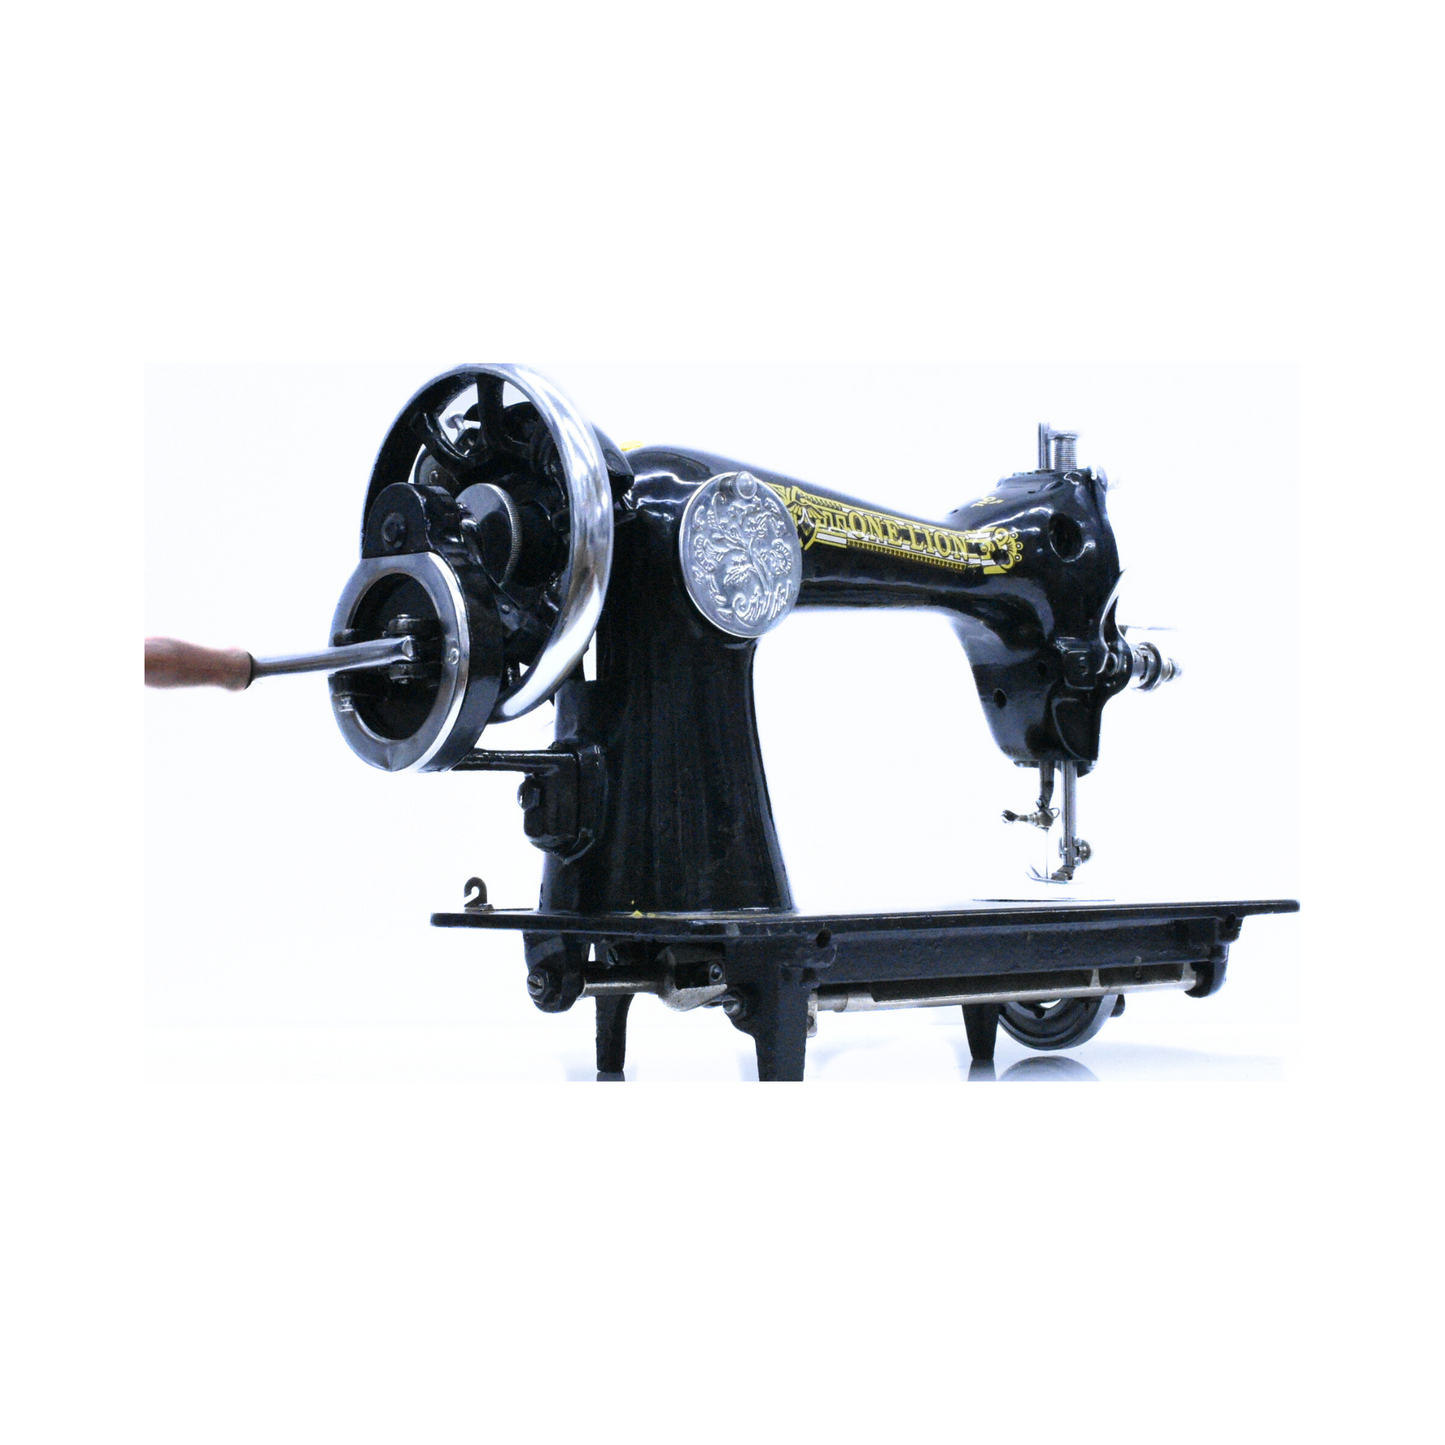 One lion - Vintage sewing machine - Black - Side view